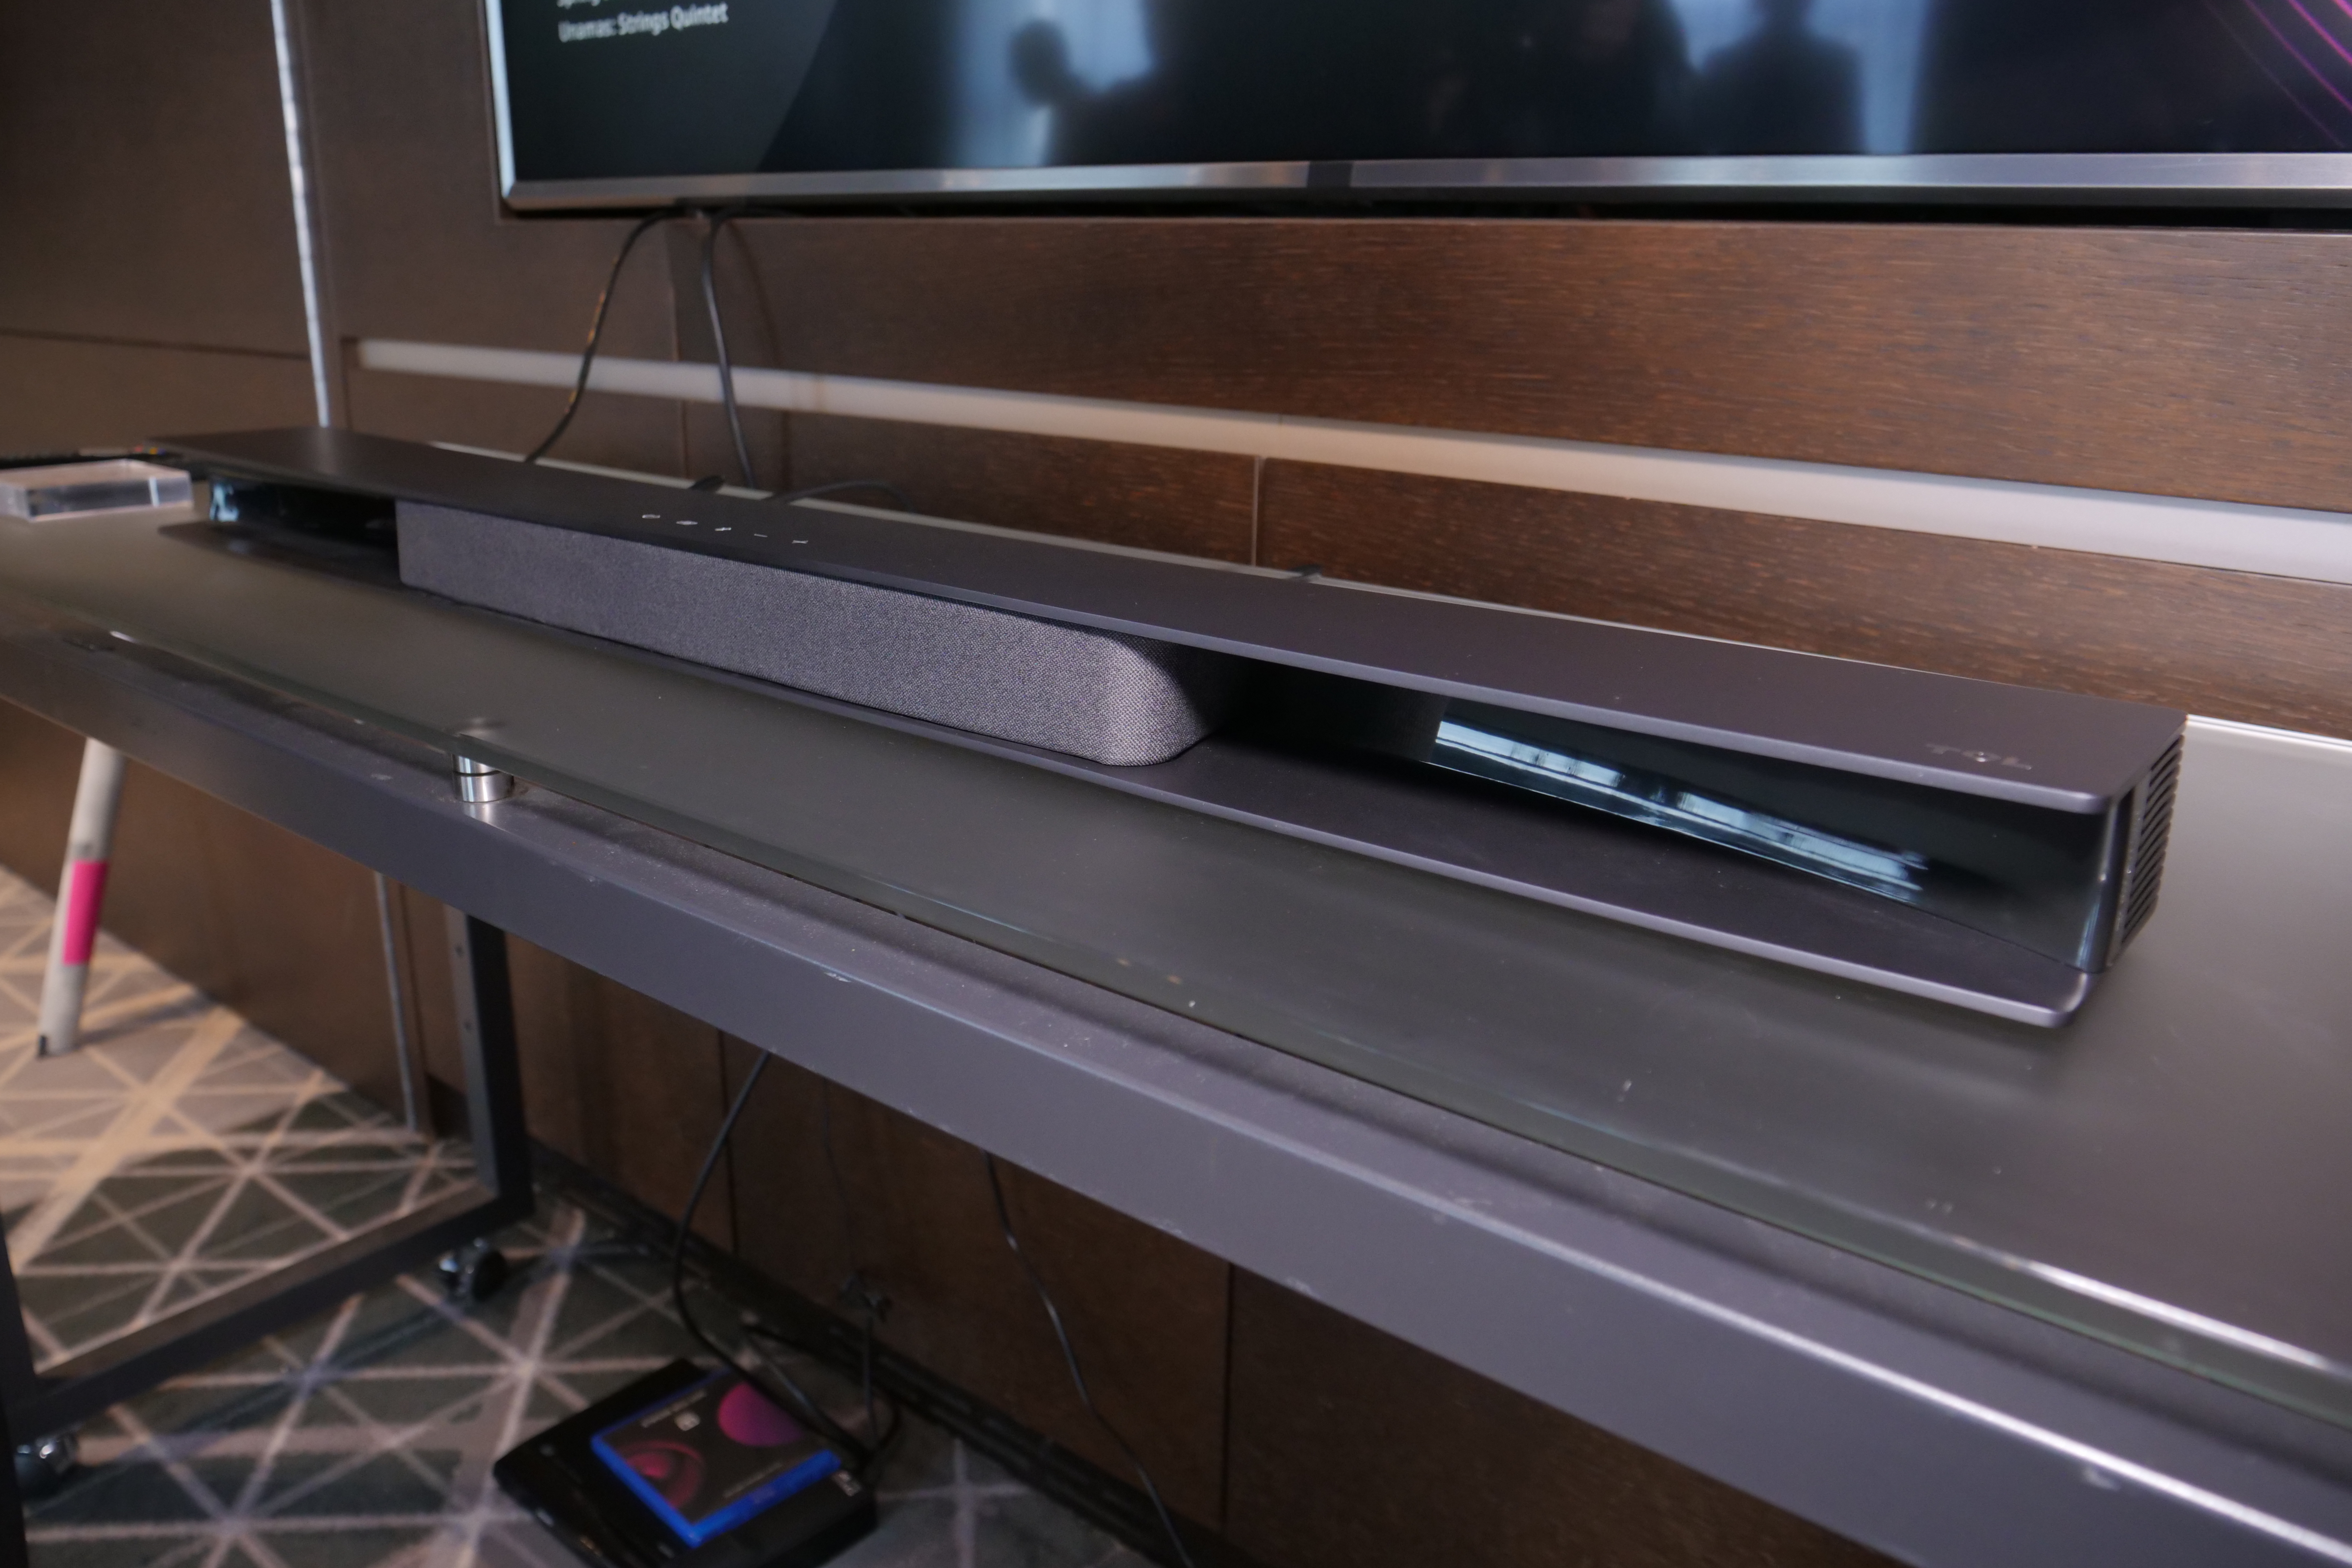 TCL Off Incredible New Dolby Atmos Soundbar at IFA 2019 | Digital Trends